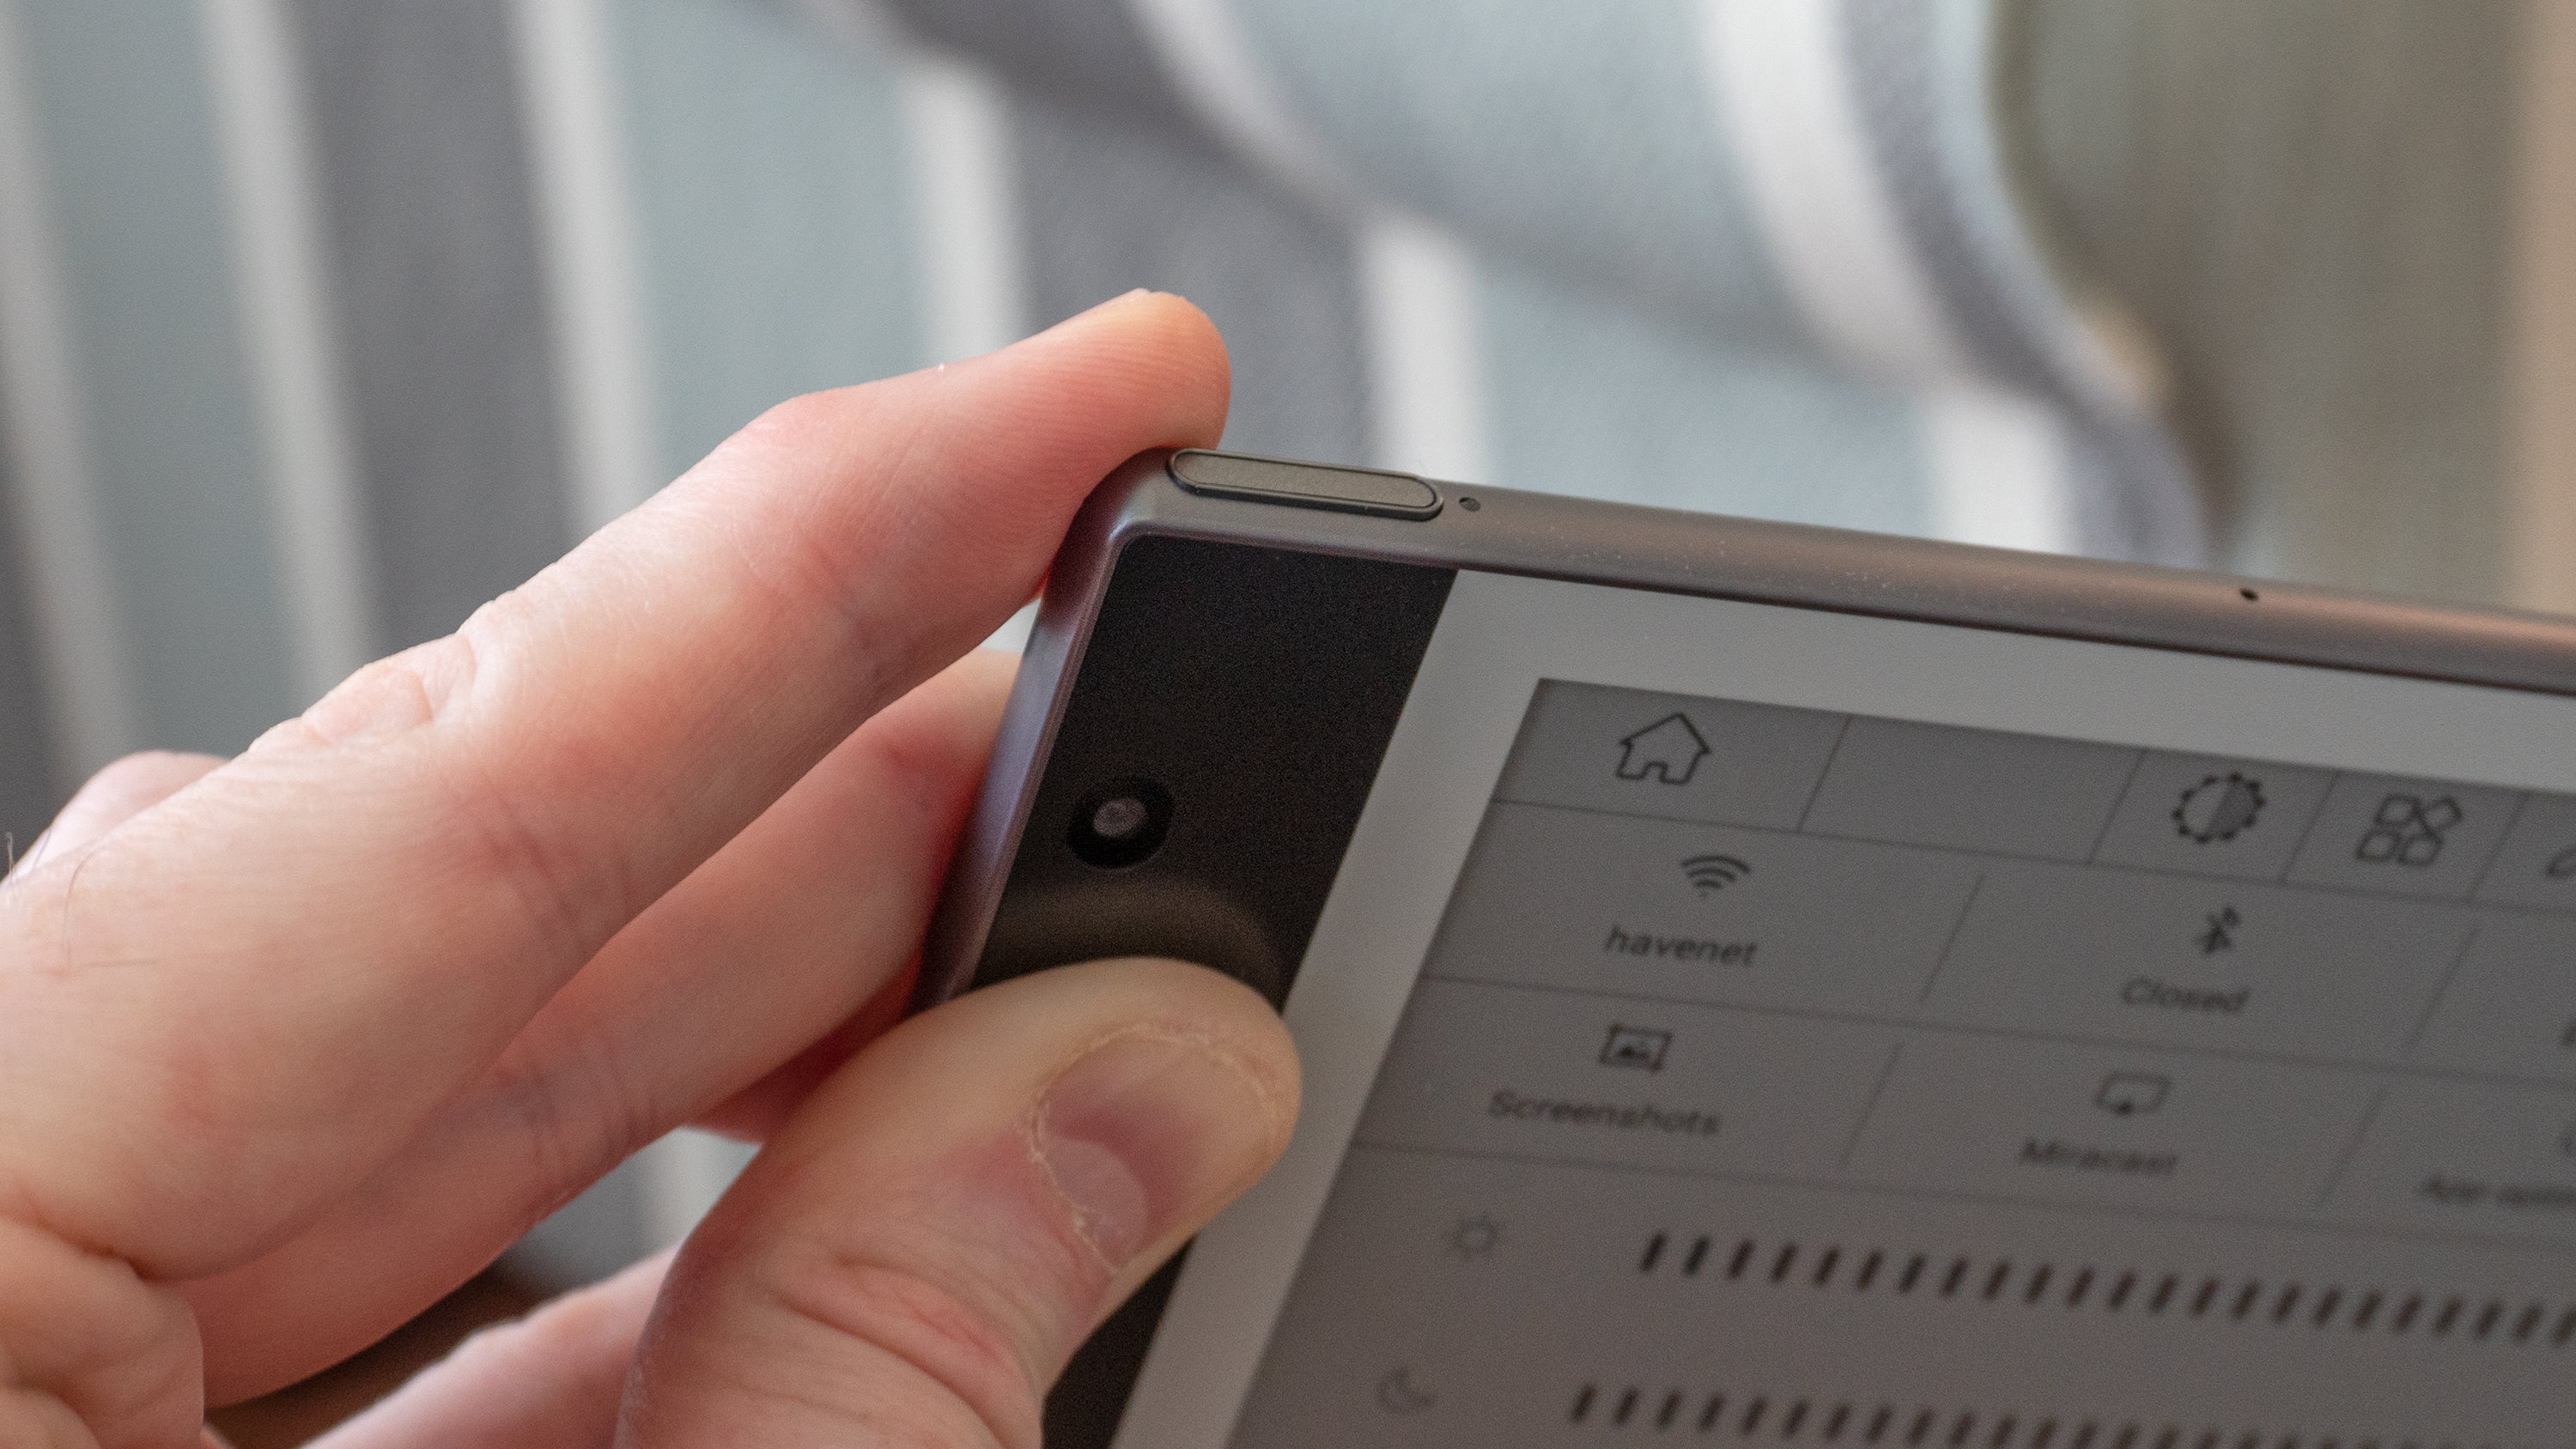 The InkNote Colour's lock button includes a built-in fingerprint reader to easily secure and access your documents. (Photo: Andrew Liszewski | Gizmodo)